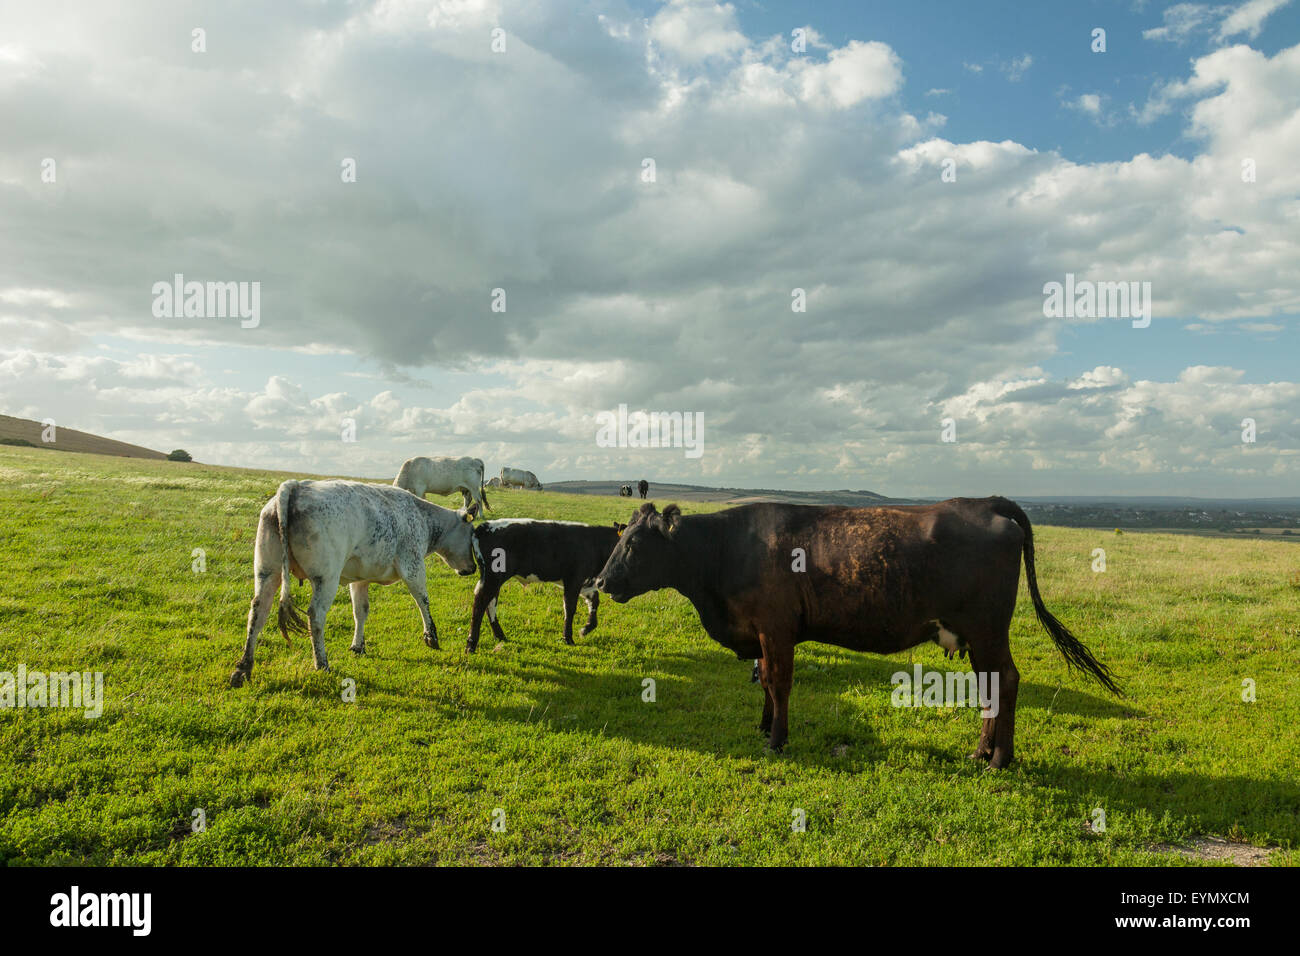 Summer afternoon on the South Downs near Rodmell, East Sussex, England. Stock Photo